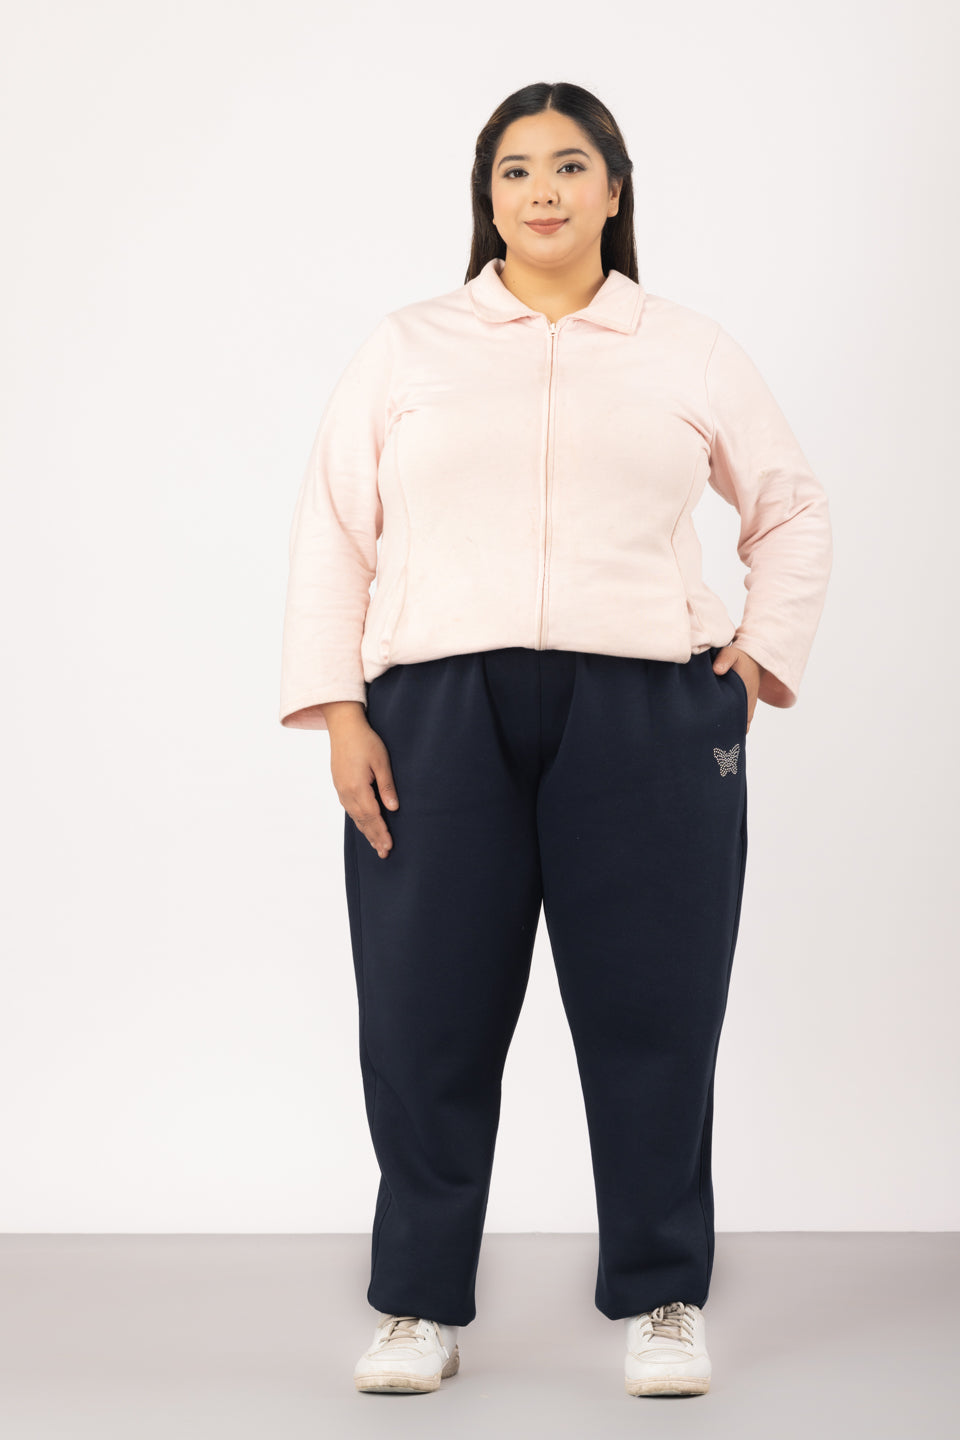 Buy Winter Cotton Fleece Printed Blue Track pants for Women In Plus Size  online at best Prices by Cupidclothings – Cupid Clothings